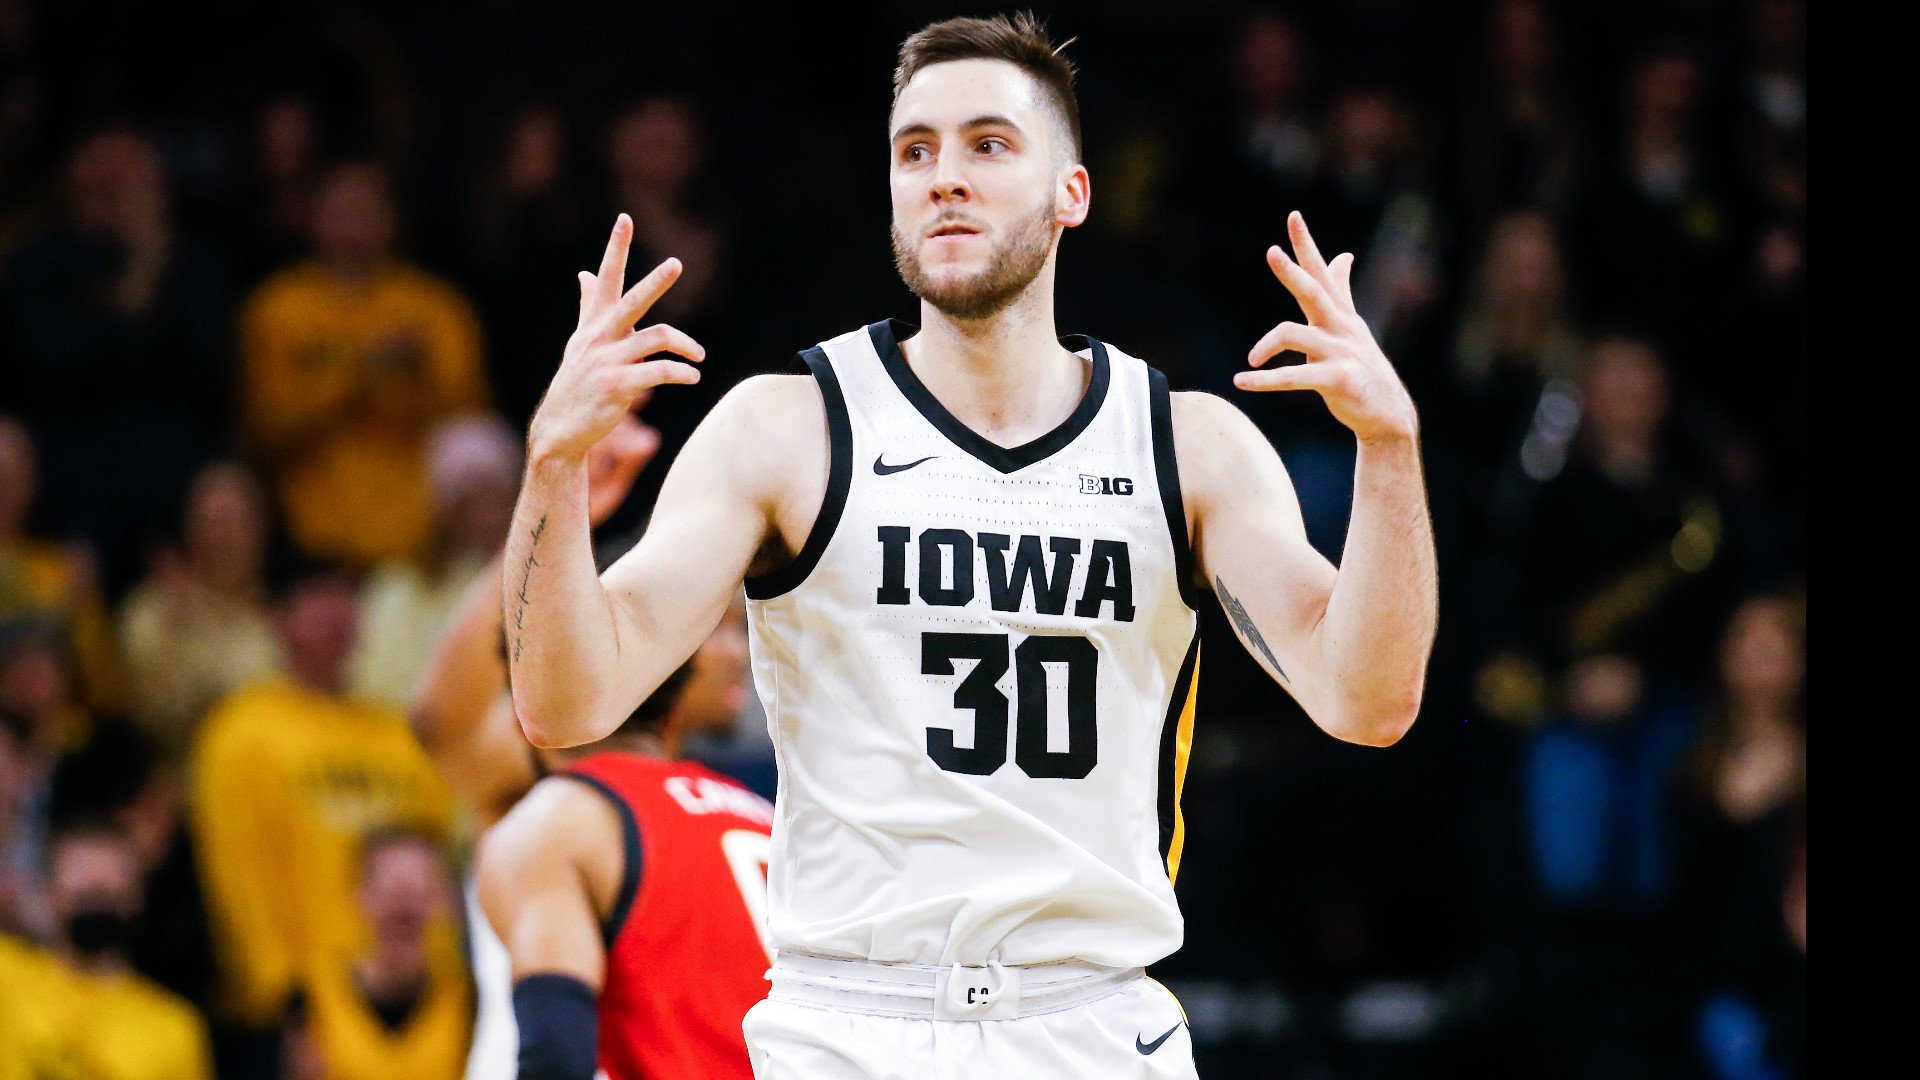 The men’s basketball game between Iowa and Northwestern scheduled for Wednesday in Iowa City will not be played due to COVID-19 protocols at Northwestern.